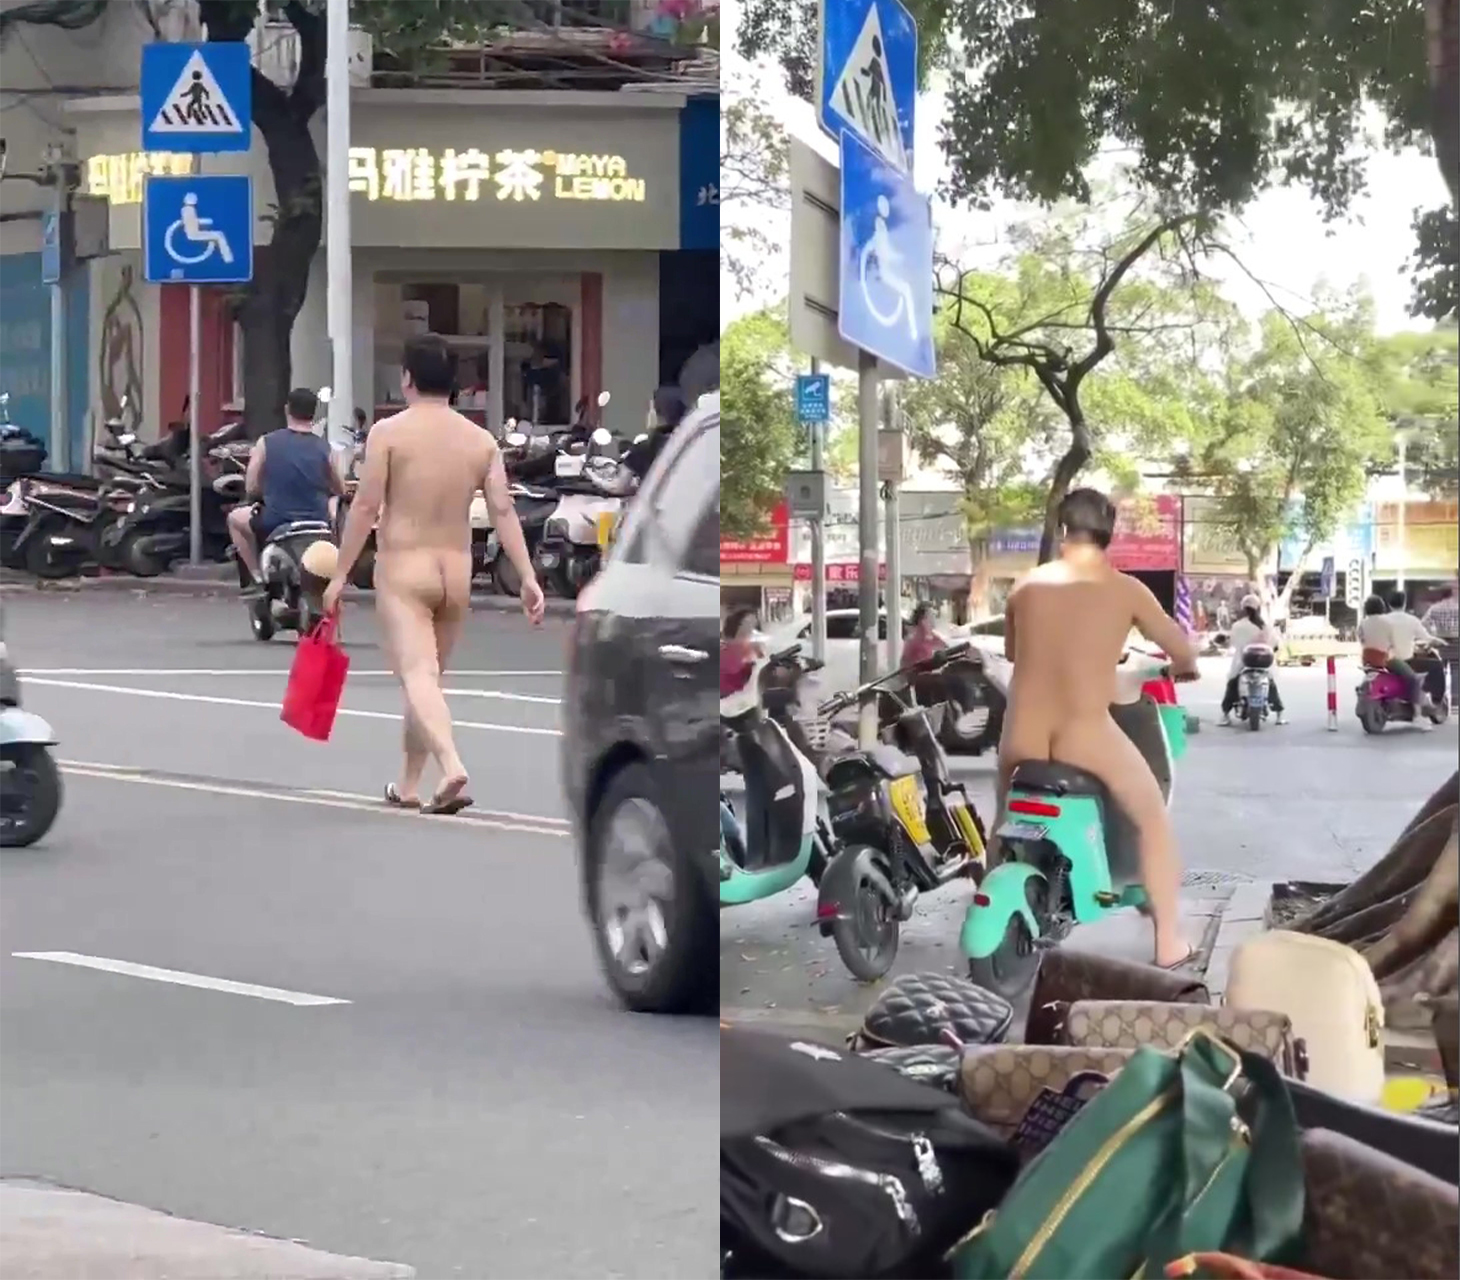 Is running naked popular now? A man ran naked on the street in Nanning!